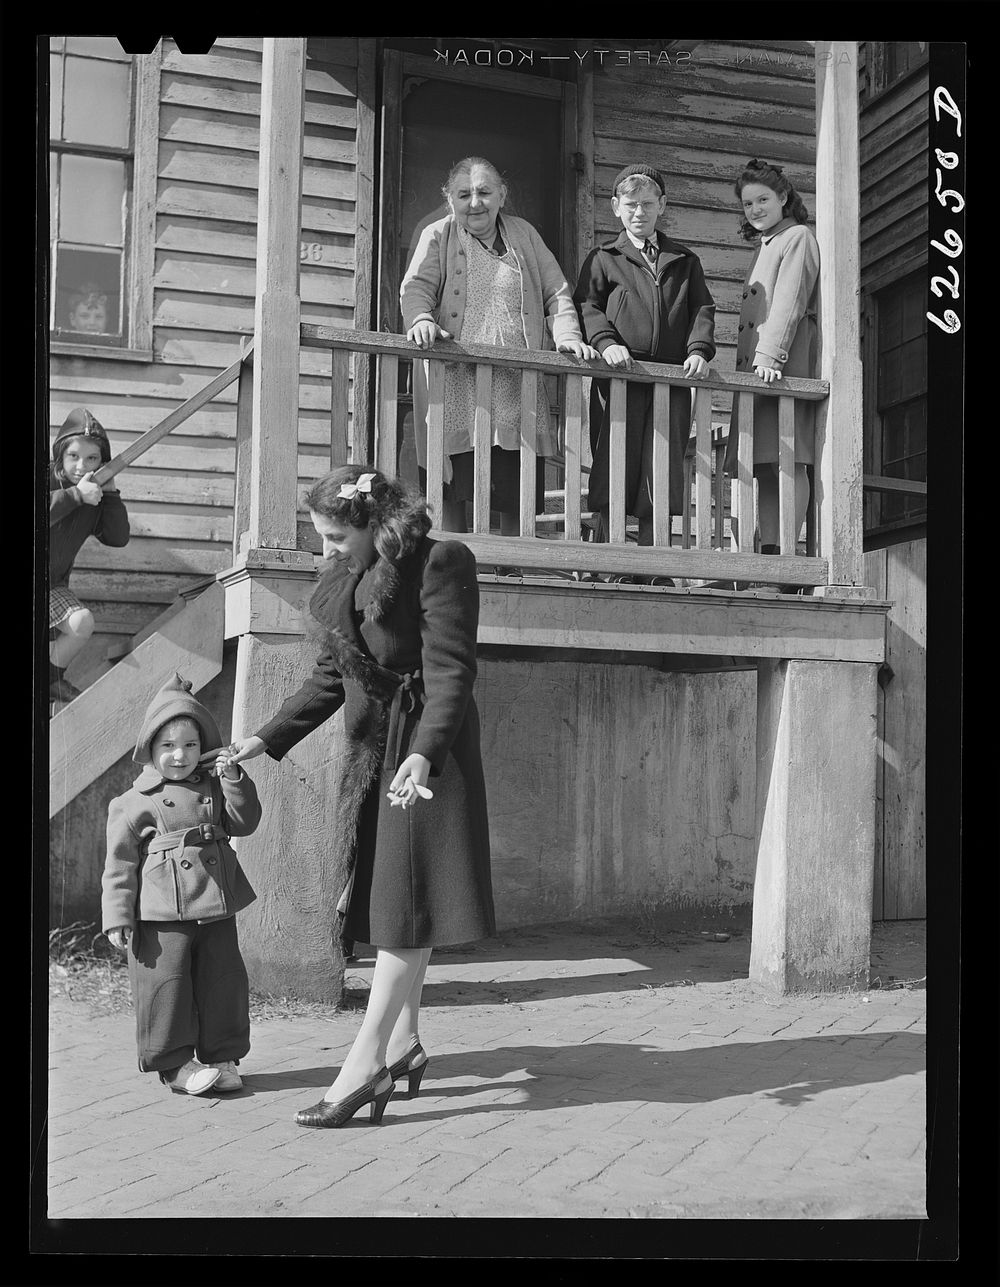 [Untitled photo, possibly related to: Portsmouth, Virginia]. Sourced from the Library of Congress.